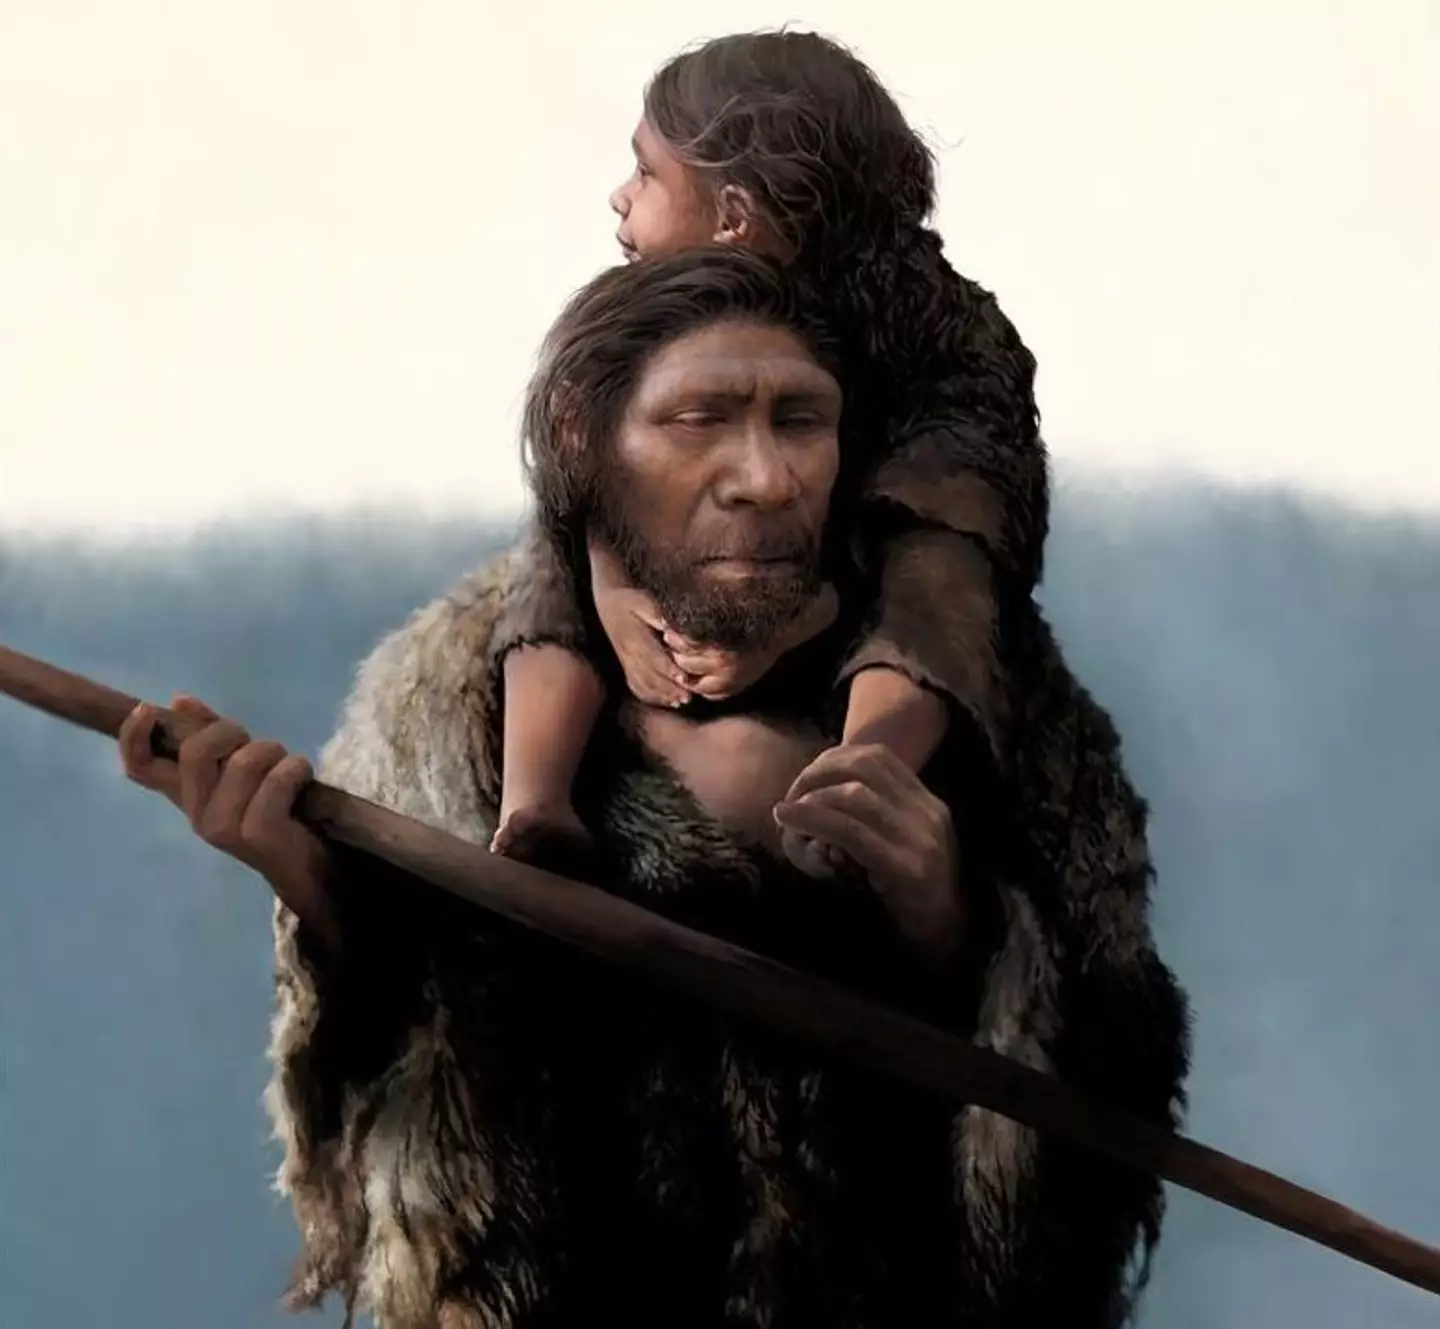 This is what we think the Neanderthal father and daughter could have looked like.